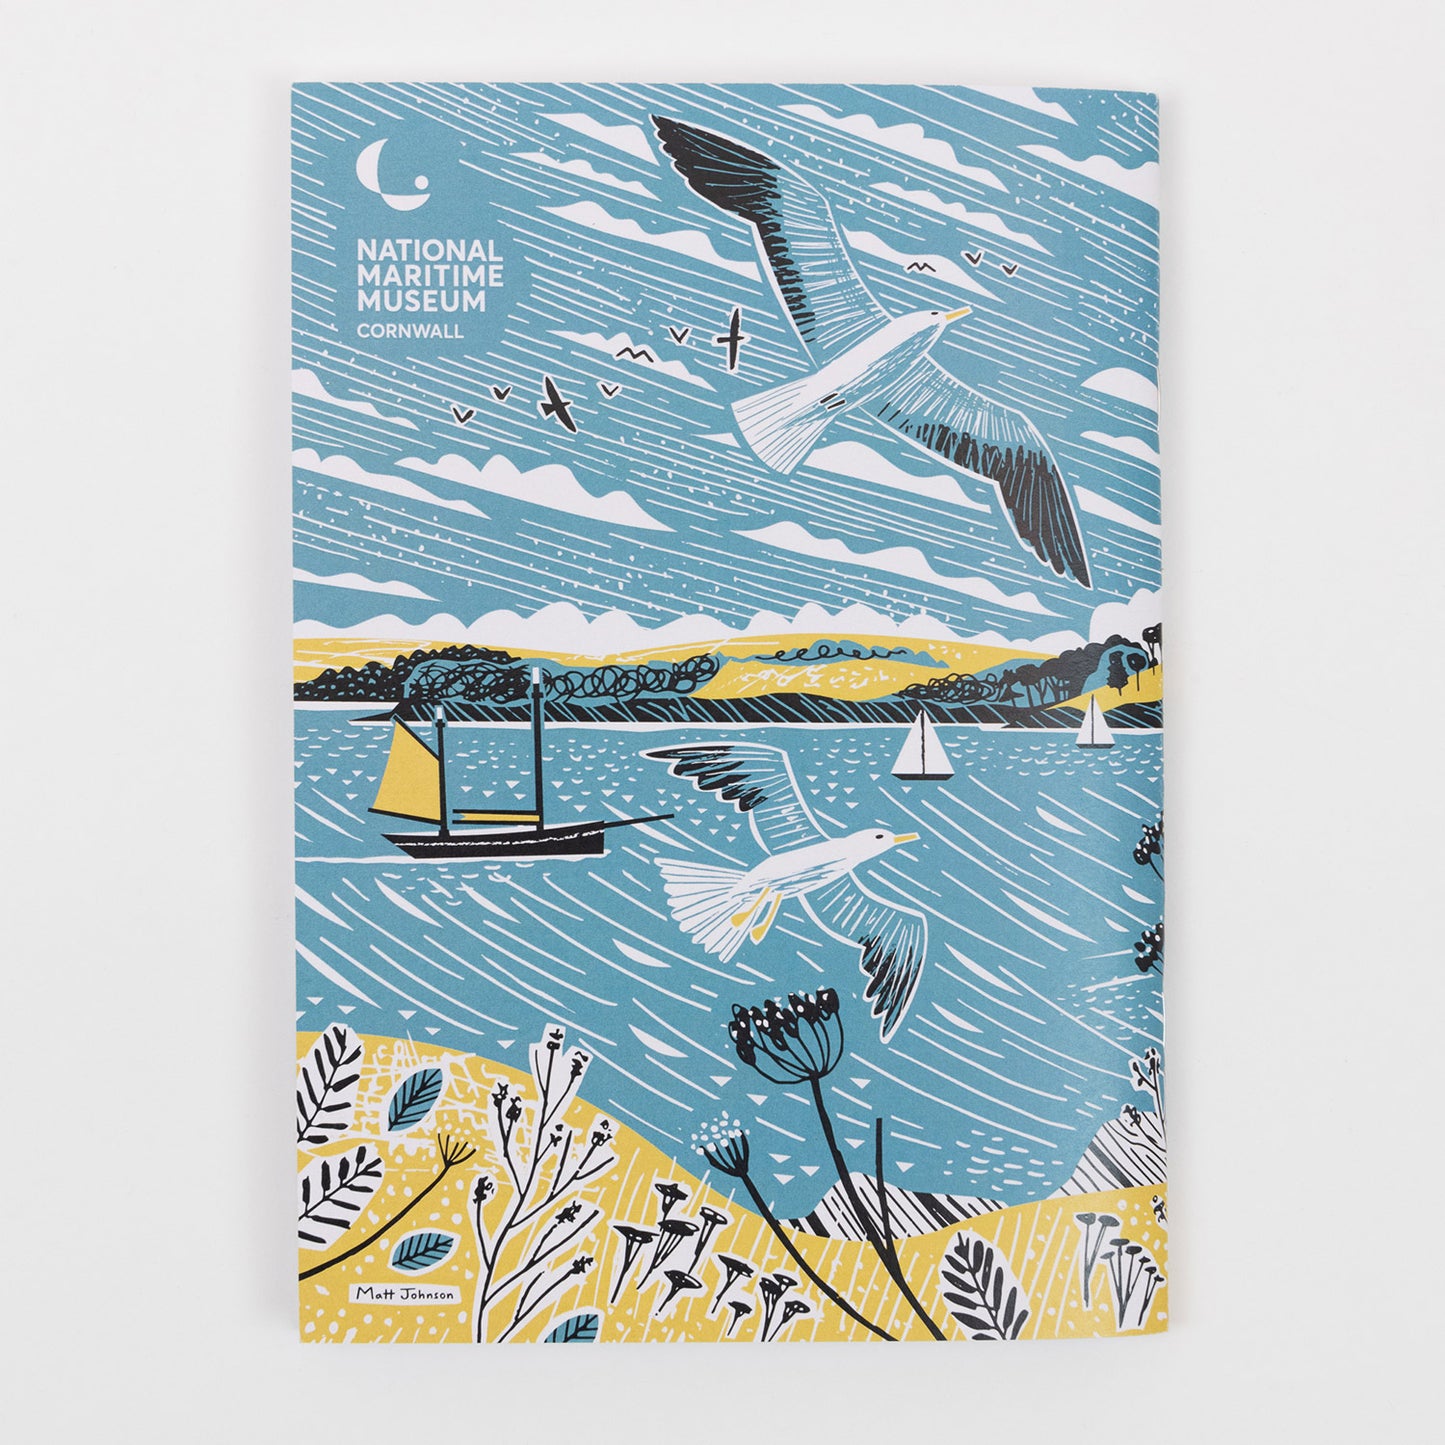 The back of the Falmouth Tall Ships Notebook featuring a yellow, blue and white illustration.